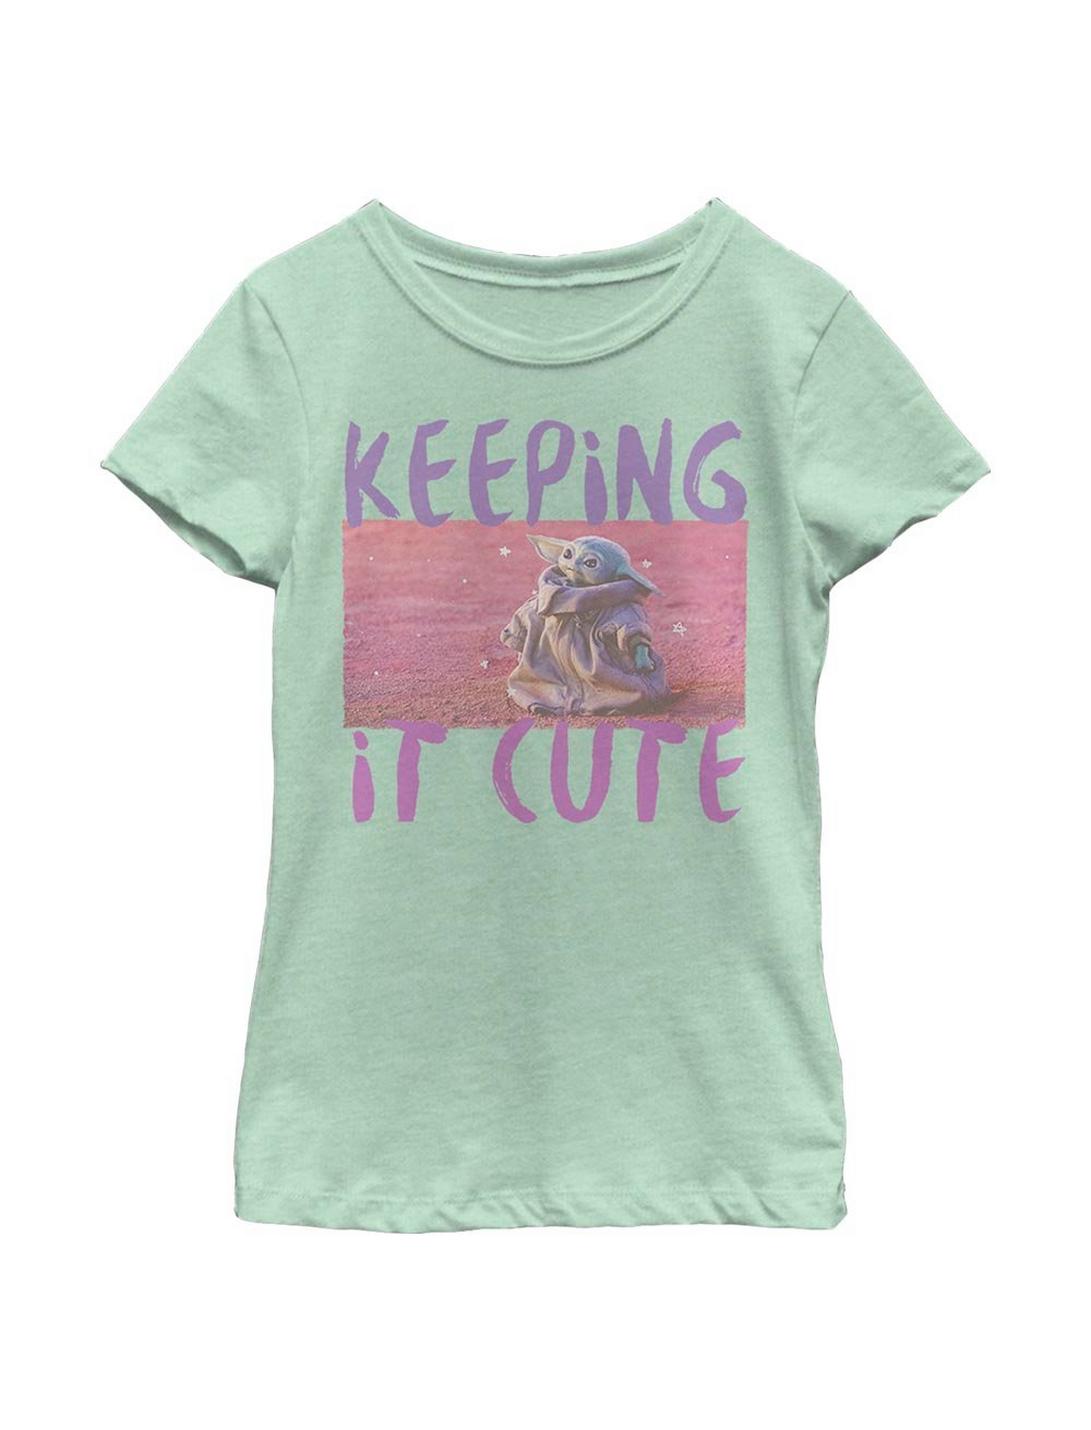 Plus Size Star Wars The Mandalorian The Child Keeping It Cute Youth Girls T-Shirt, MINT, hi-res